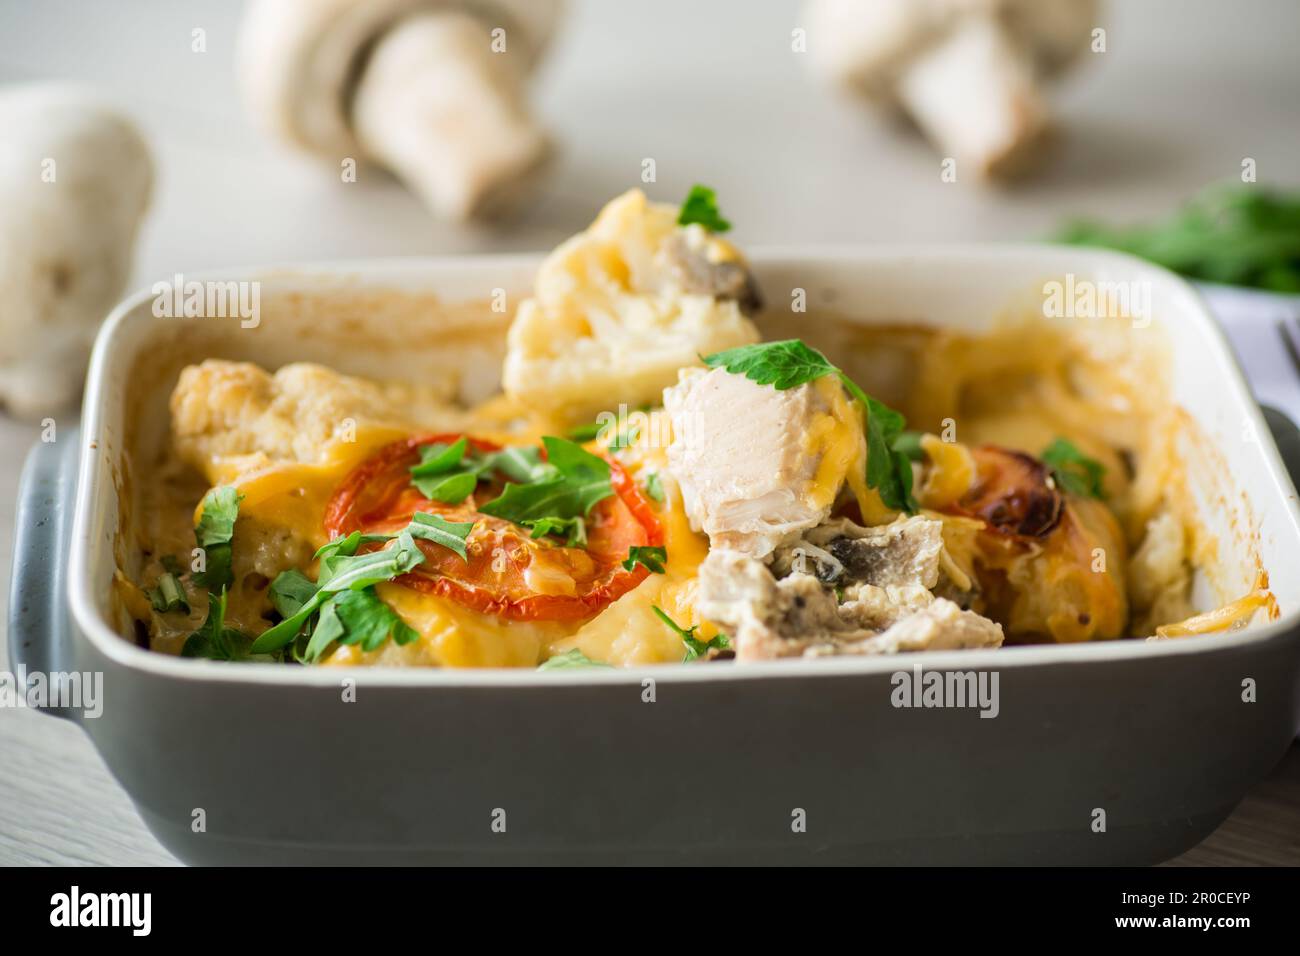 cauliflower baked with chicken fillet and mushrooms under cheese in a ceramic form, on a wooden table. Stock Photo